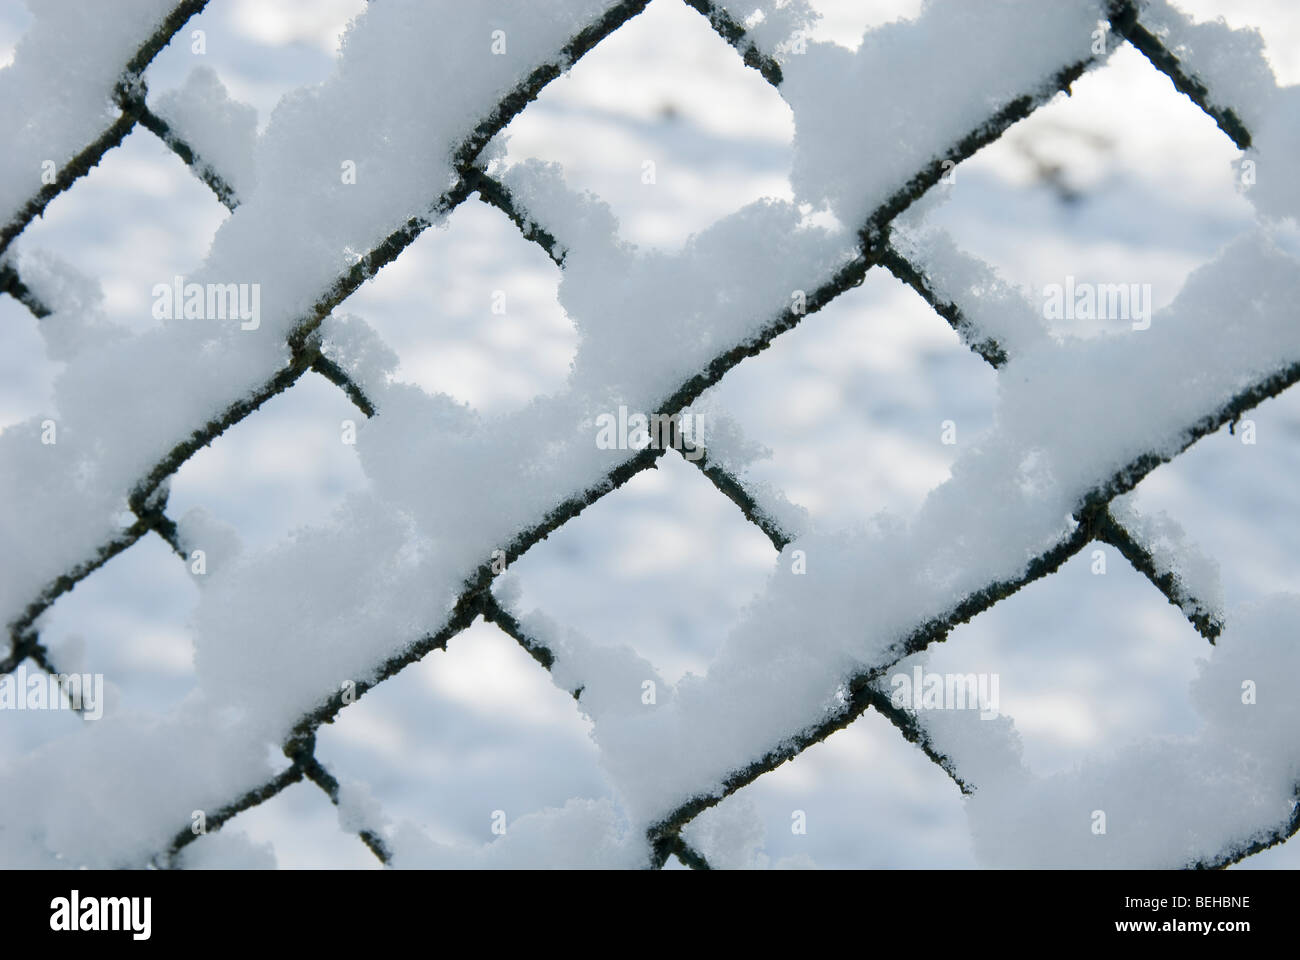 Snow built up on on a wire fence Stock Photo